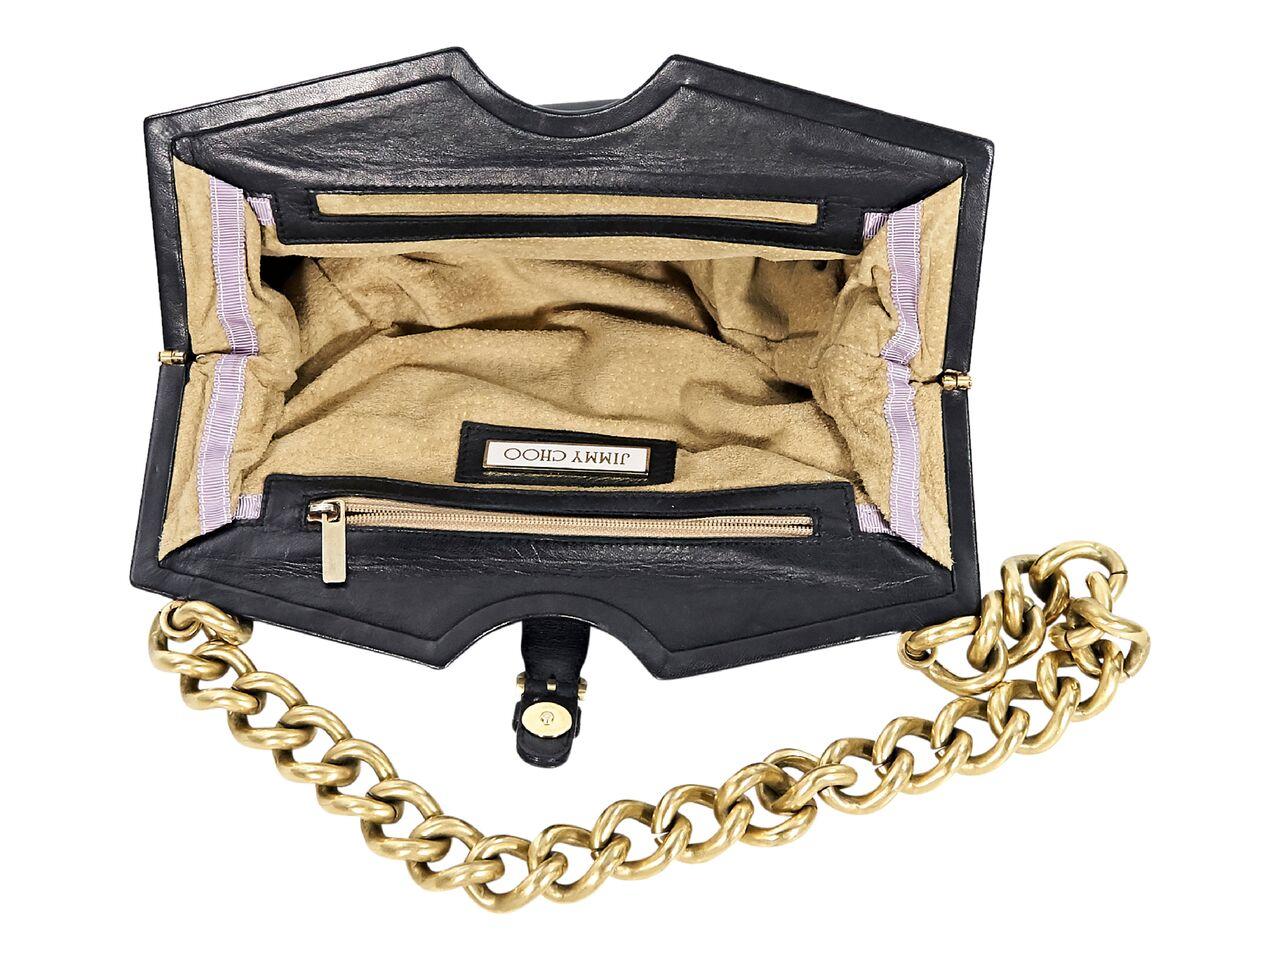 Product details:  Black leather shoulder bag by Jimmy Choo.  Accented with pleats.  Single chain shoulder strap.  Top magnetic snap tab closure.  Lined interior with inner zip and slide pockets.  Goldtone hardware.  
Condition: Pre-owned. Very good.